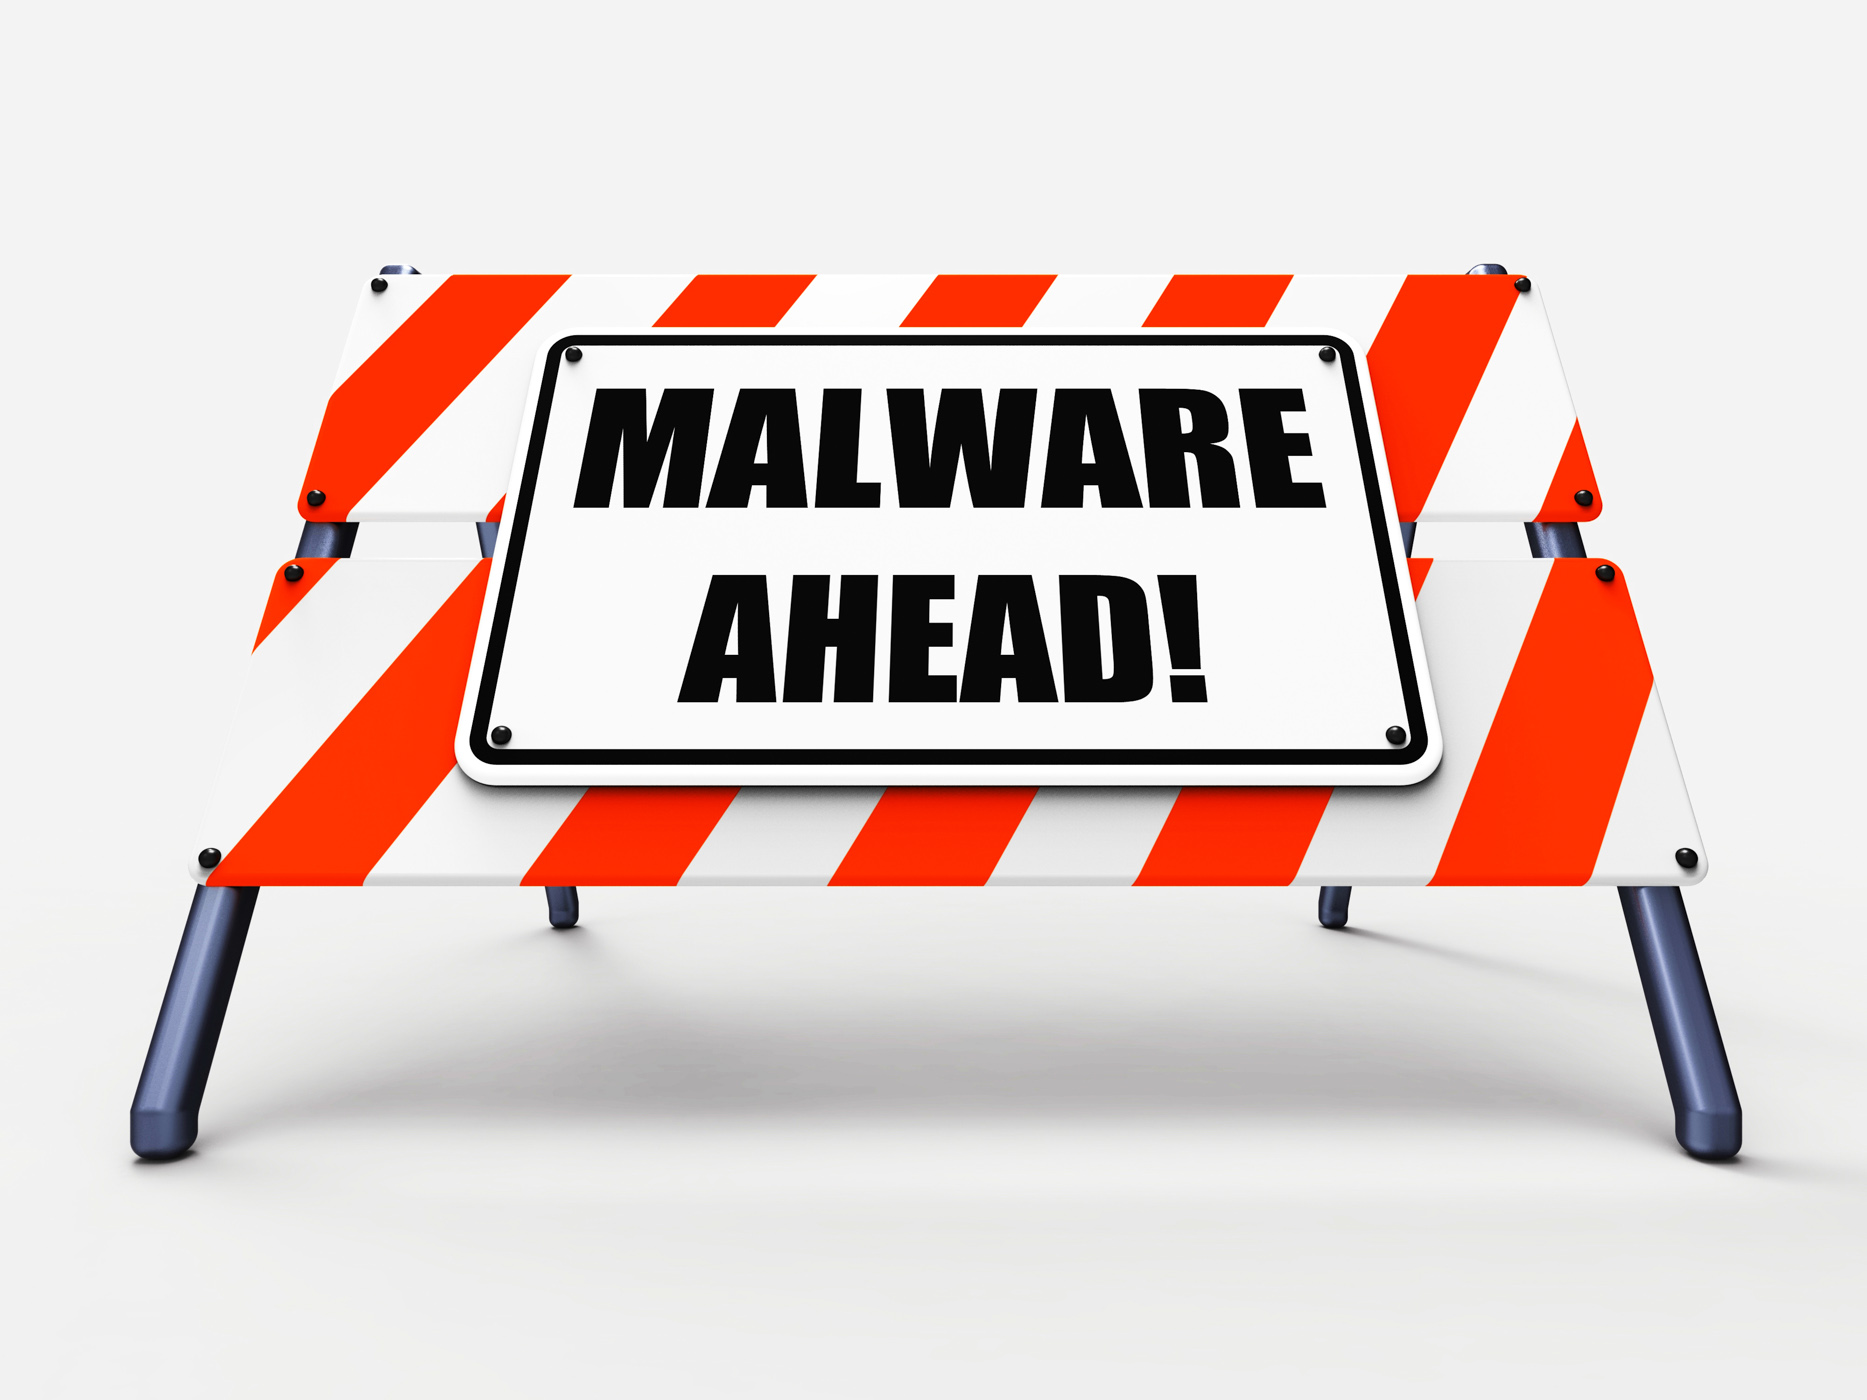 Malware ahead refers to malicious danger for computer future photo